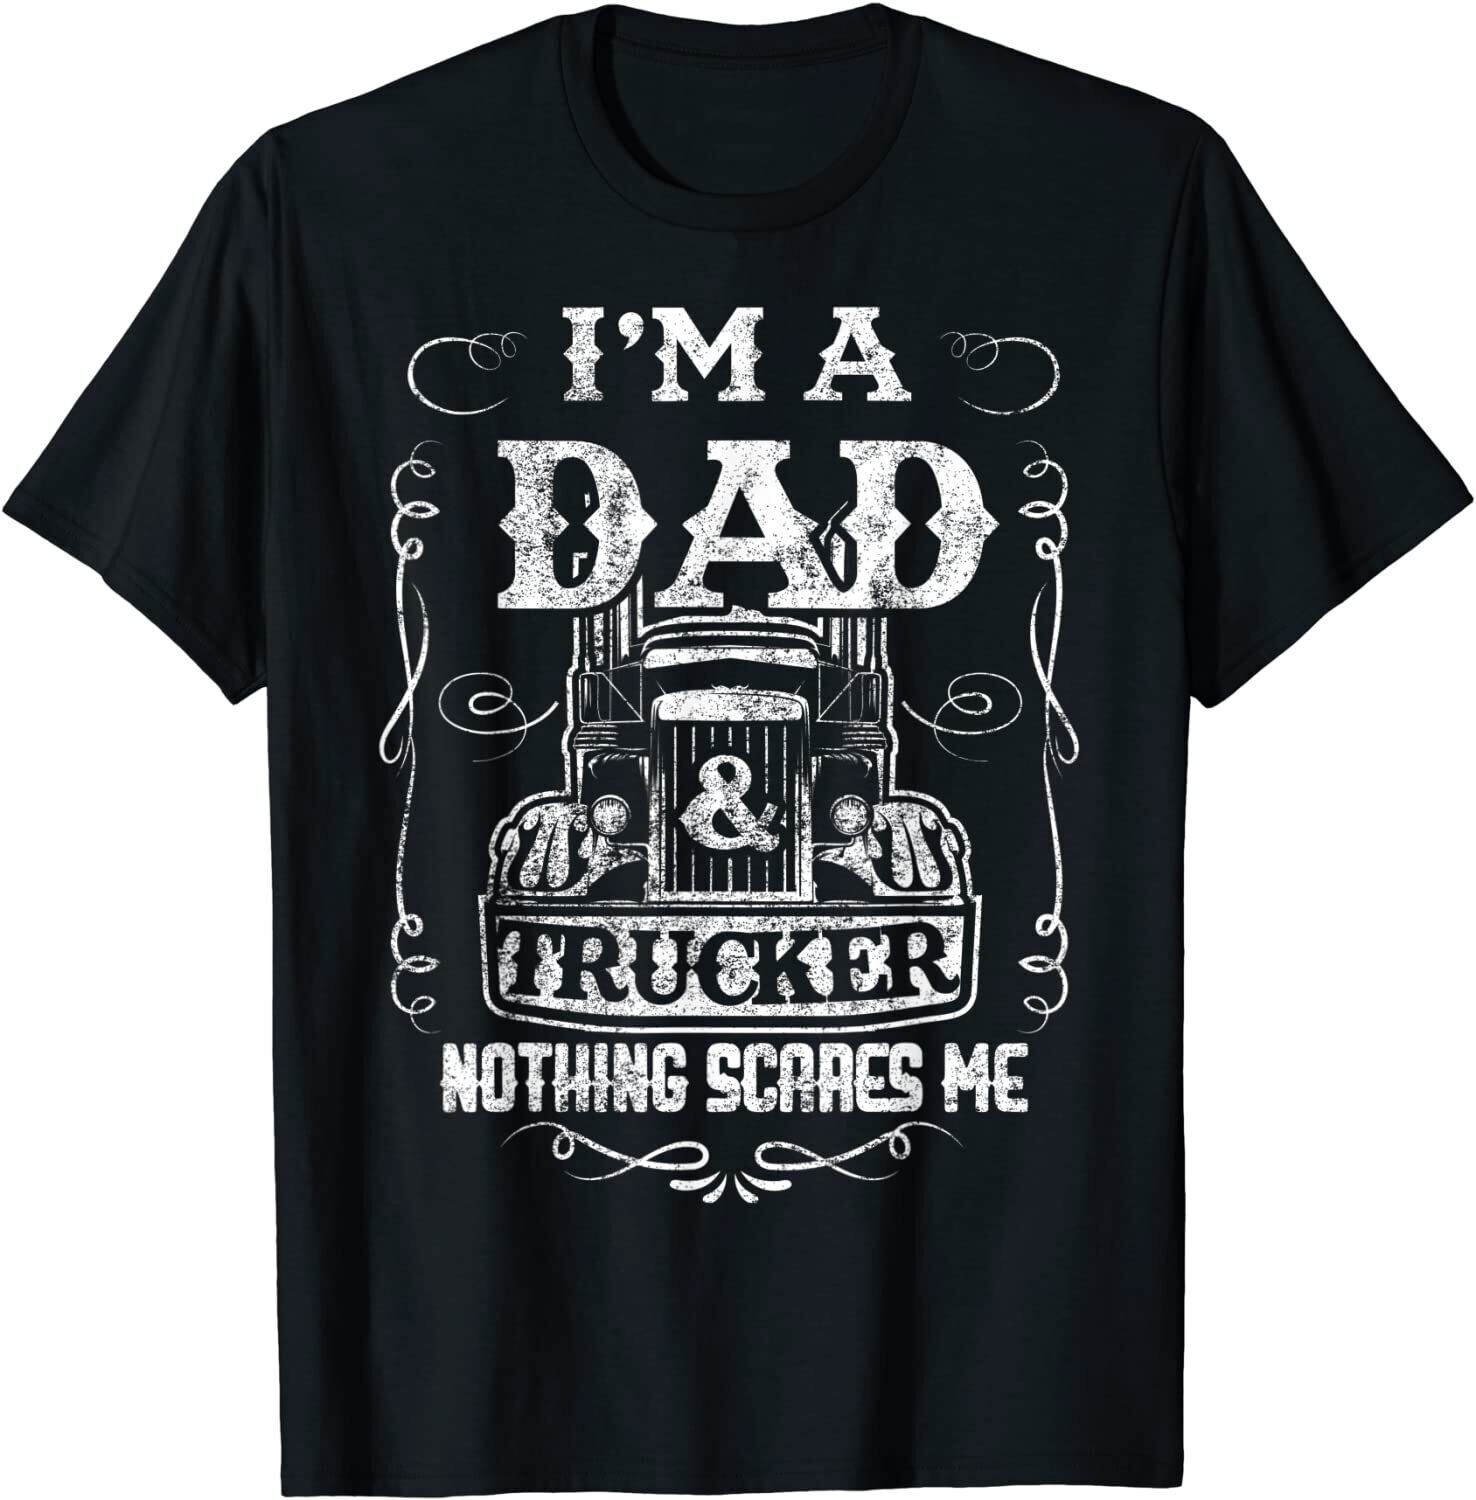 Trucker father's day gifts